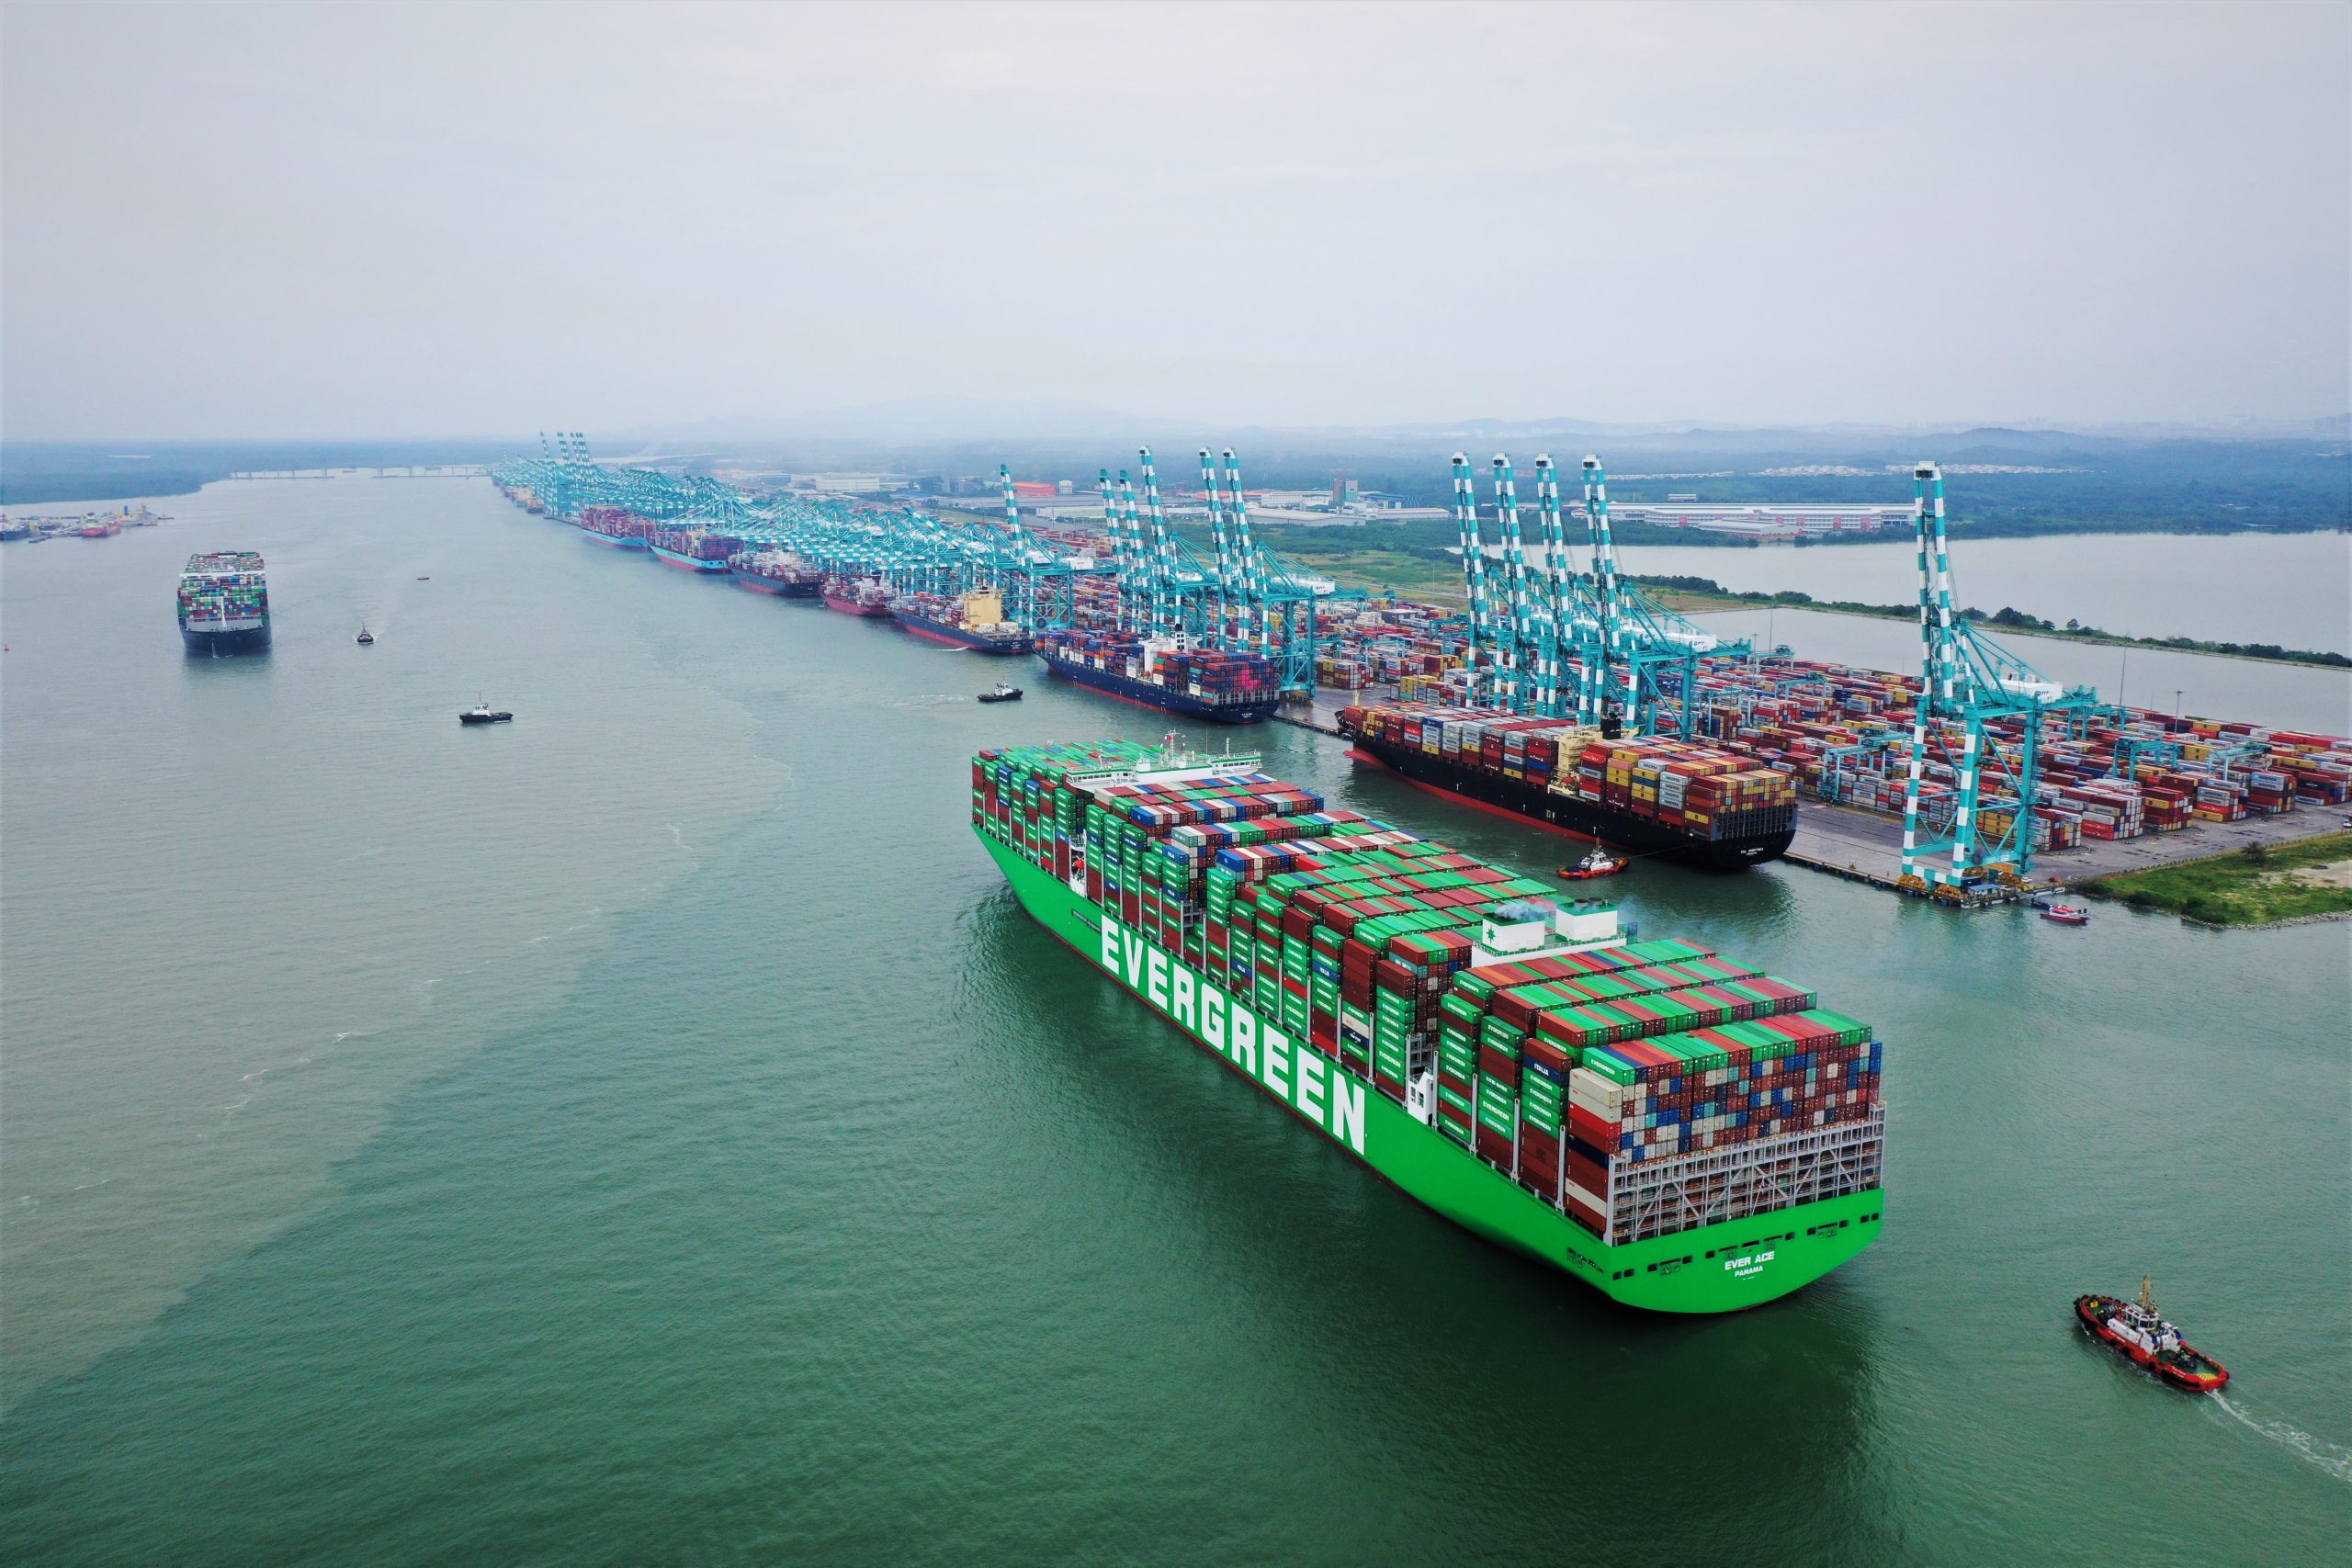 Port of Tanjung Pelepas welcomes Ever Ace, world’s largest container vessel